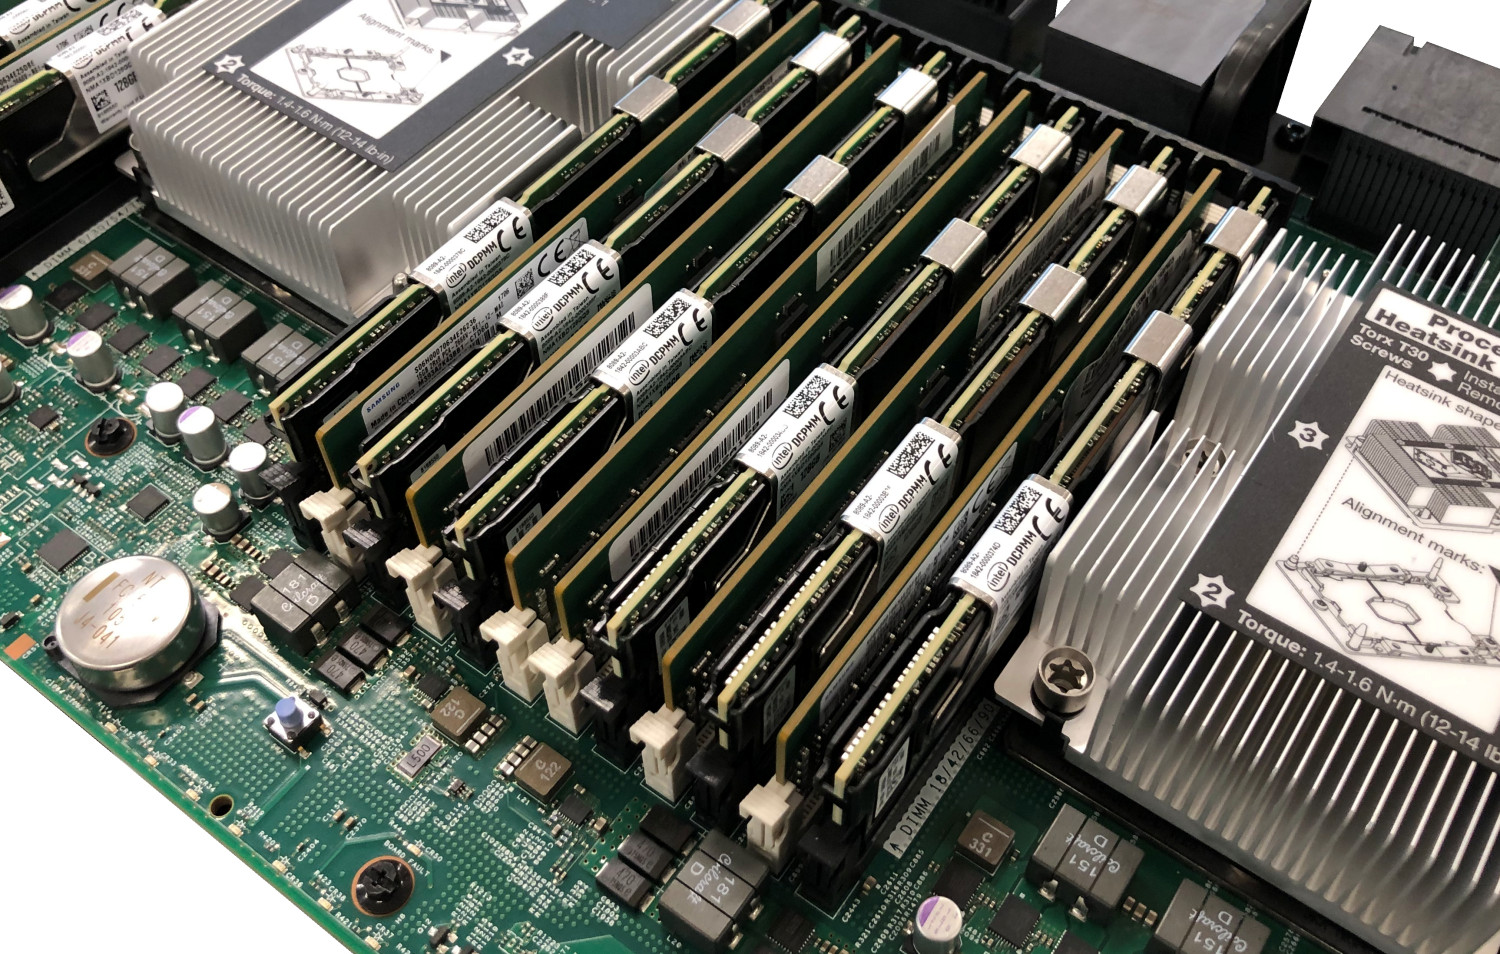 DCPMMs installed in an SR950 system board